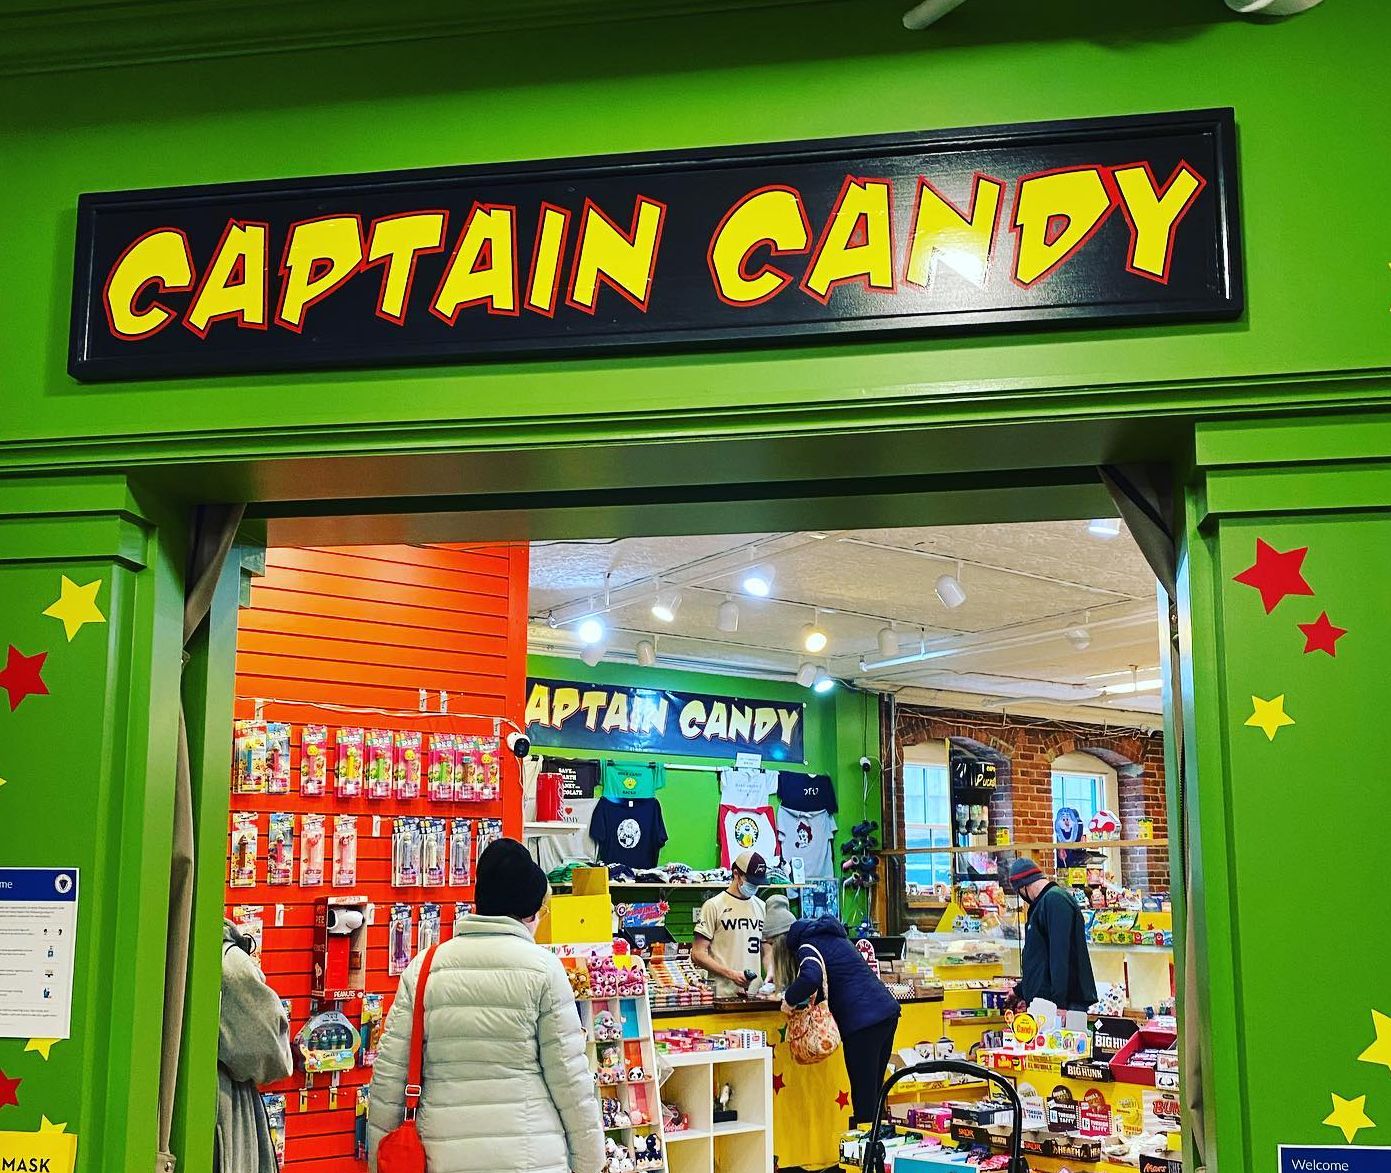 The go-to place for nostalgic candy -- Check out Captain Candy in Thornes Marketplace Northampton MA!